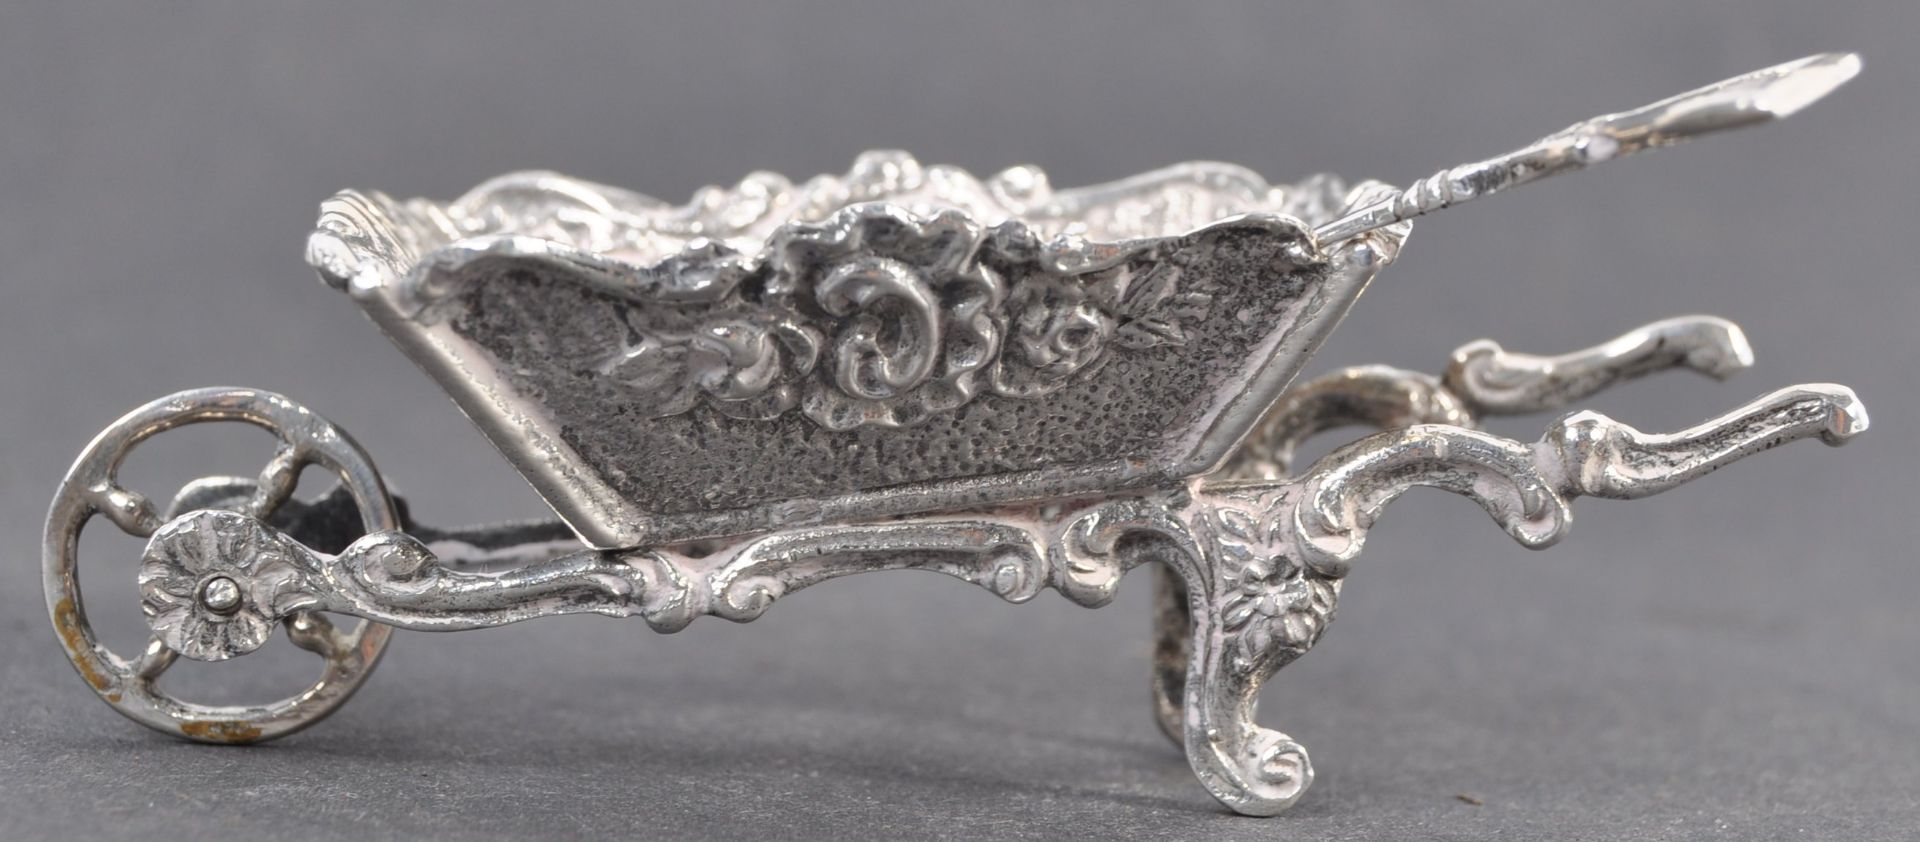 PAIR OF EDWARDIAN NOVELTY SILVER TABLE SALTS IN THE FORM OF WHEELBARROWS - Image 4 of 7